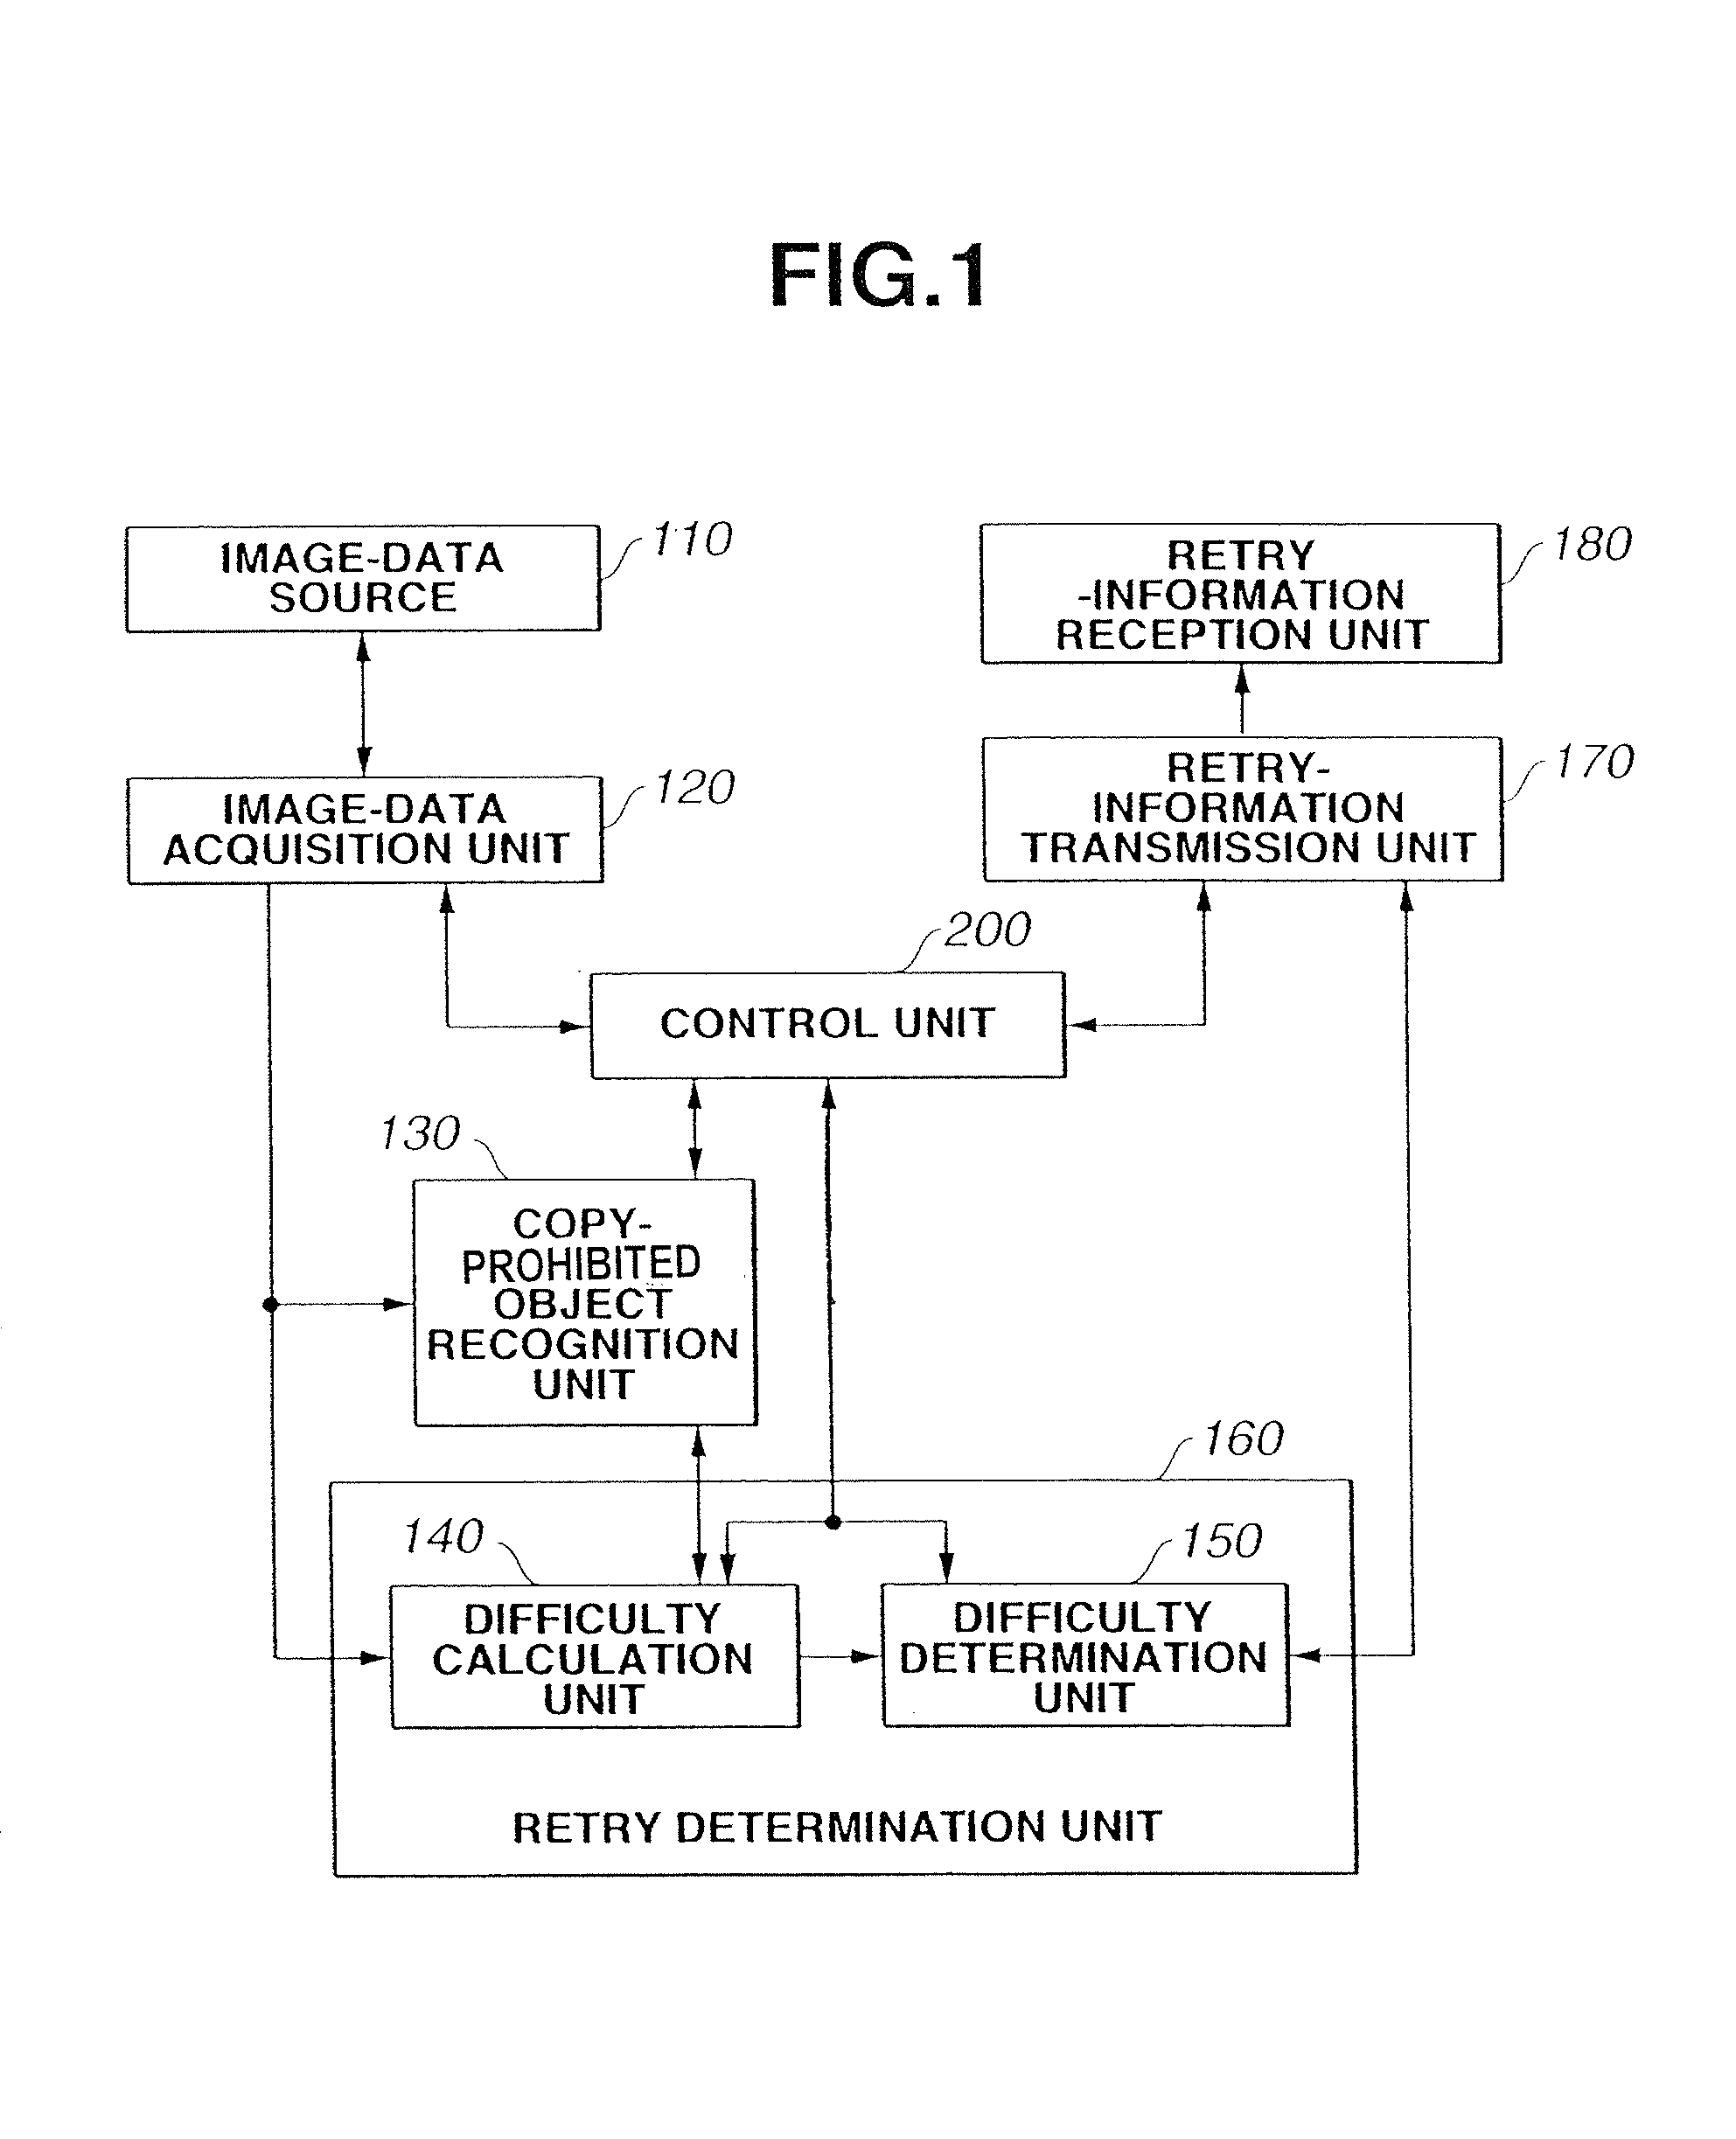 Image processing apparatus effective for preventing counterfeiting of a copy-prohibition object